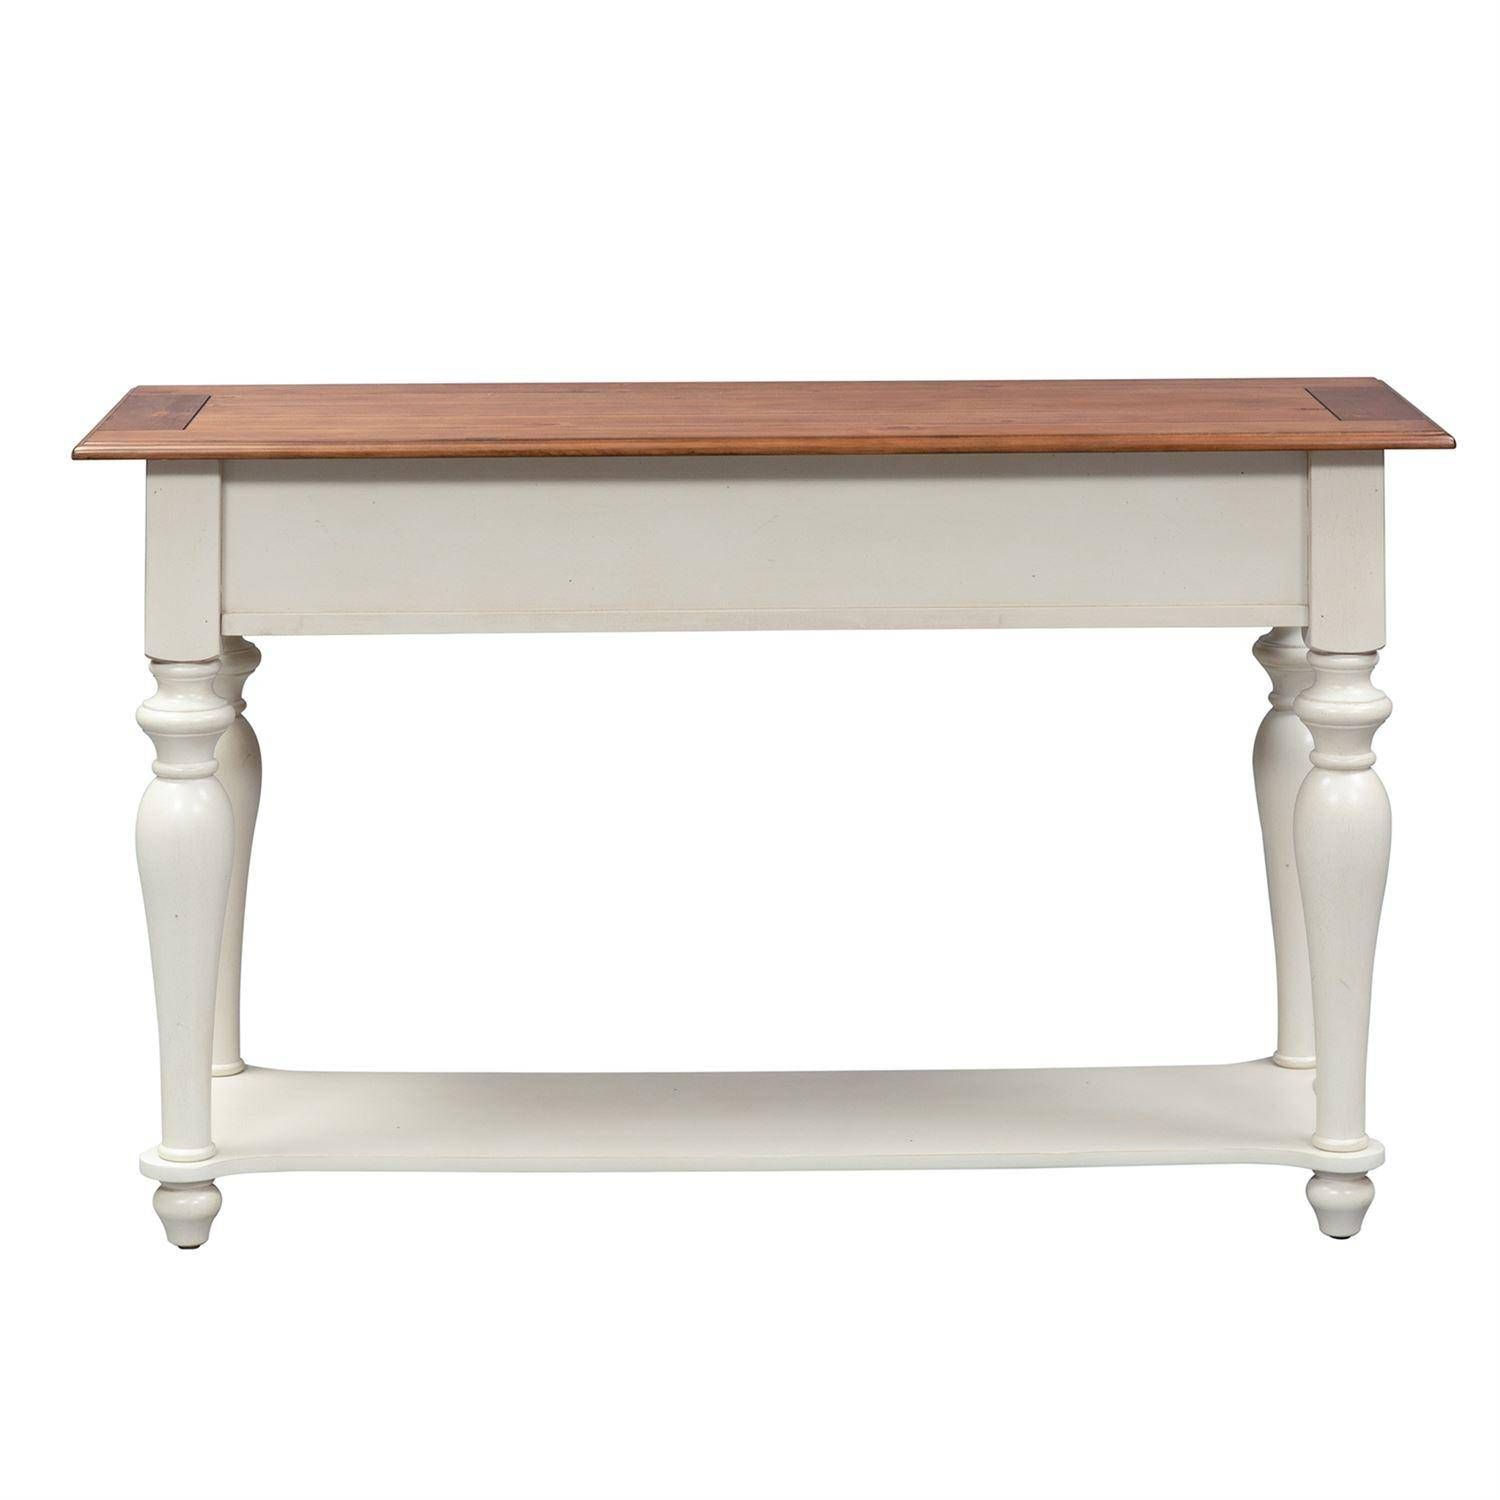 Traditional Brown Wood Console Table Ocean Isle (303 Ot) Liberty Intended For Brown Wood Console Tables (View 15 of 20)